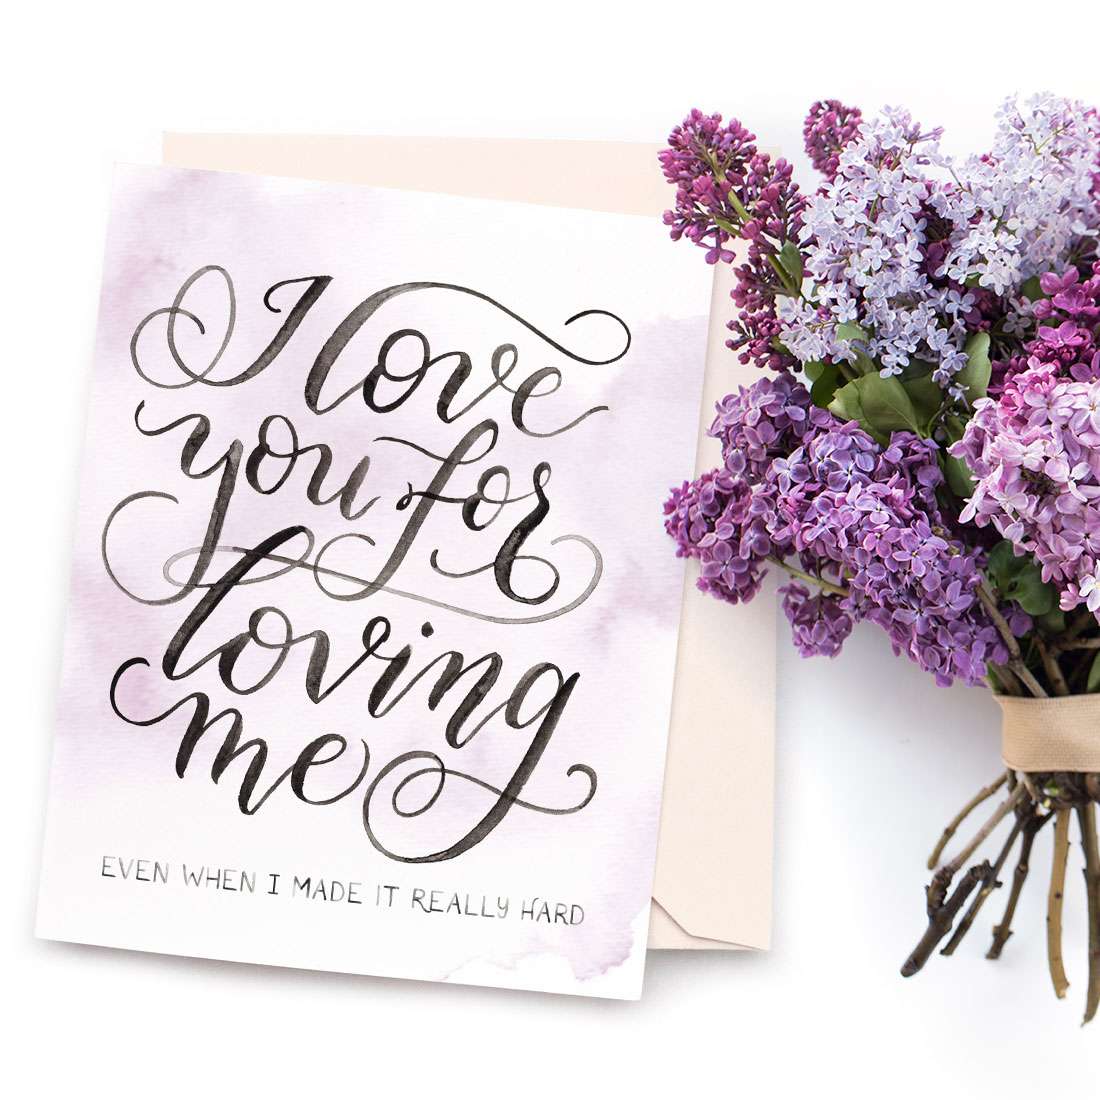 Image of a hand-lettered watercolor card saying "I love you for loving me... even when I made it really hard" by CharmCat | charmcat.net